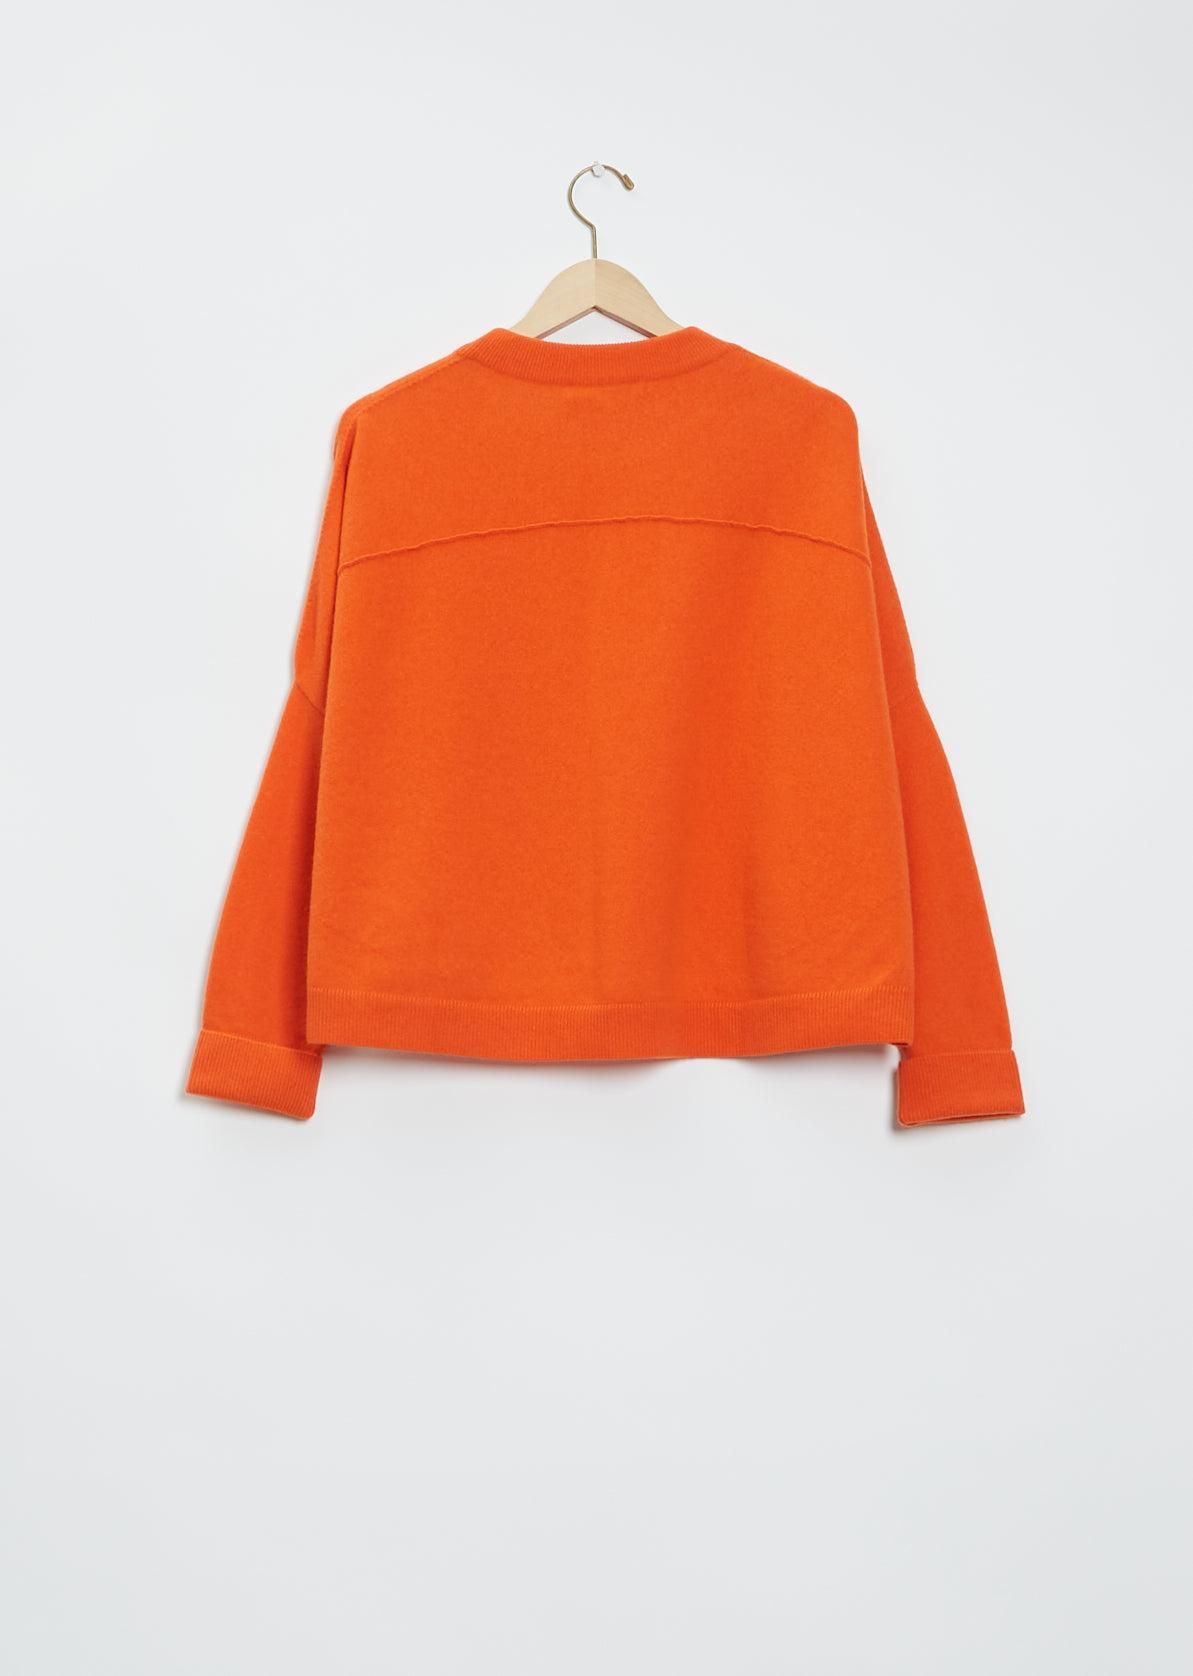 Dusan Chunky Cashmere Sweater in Orange | Lyst